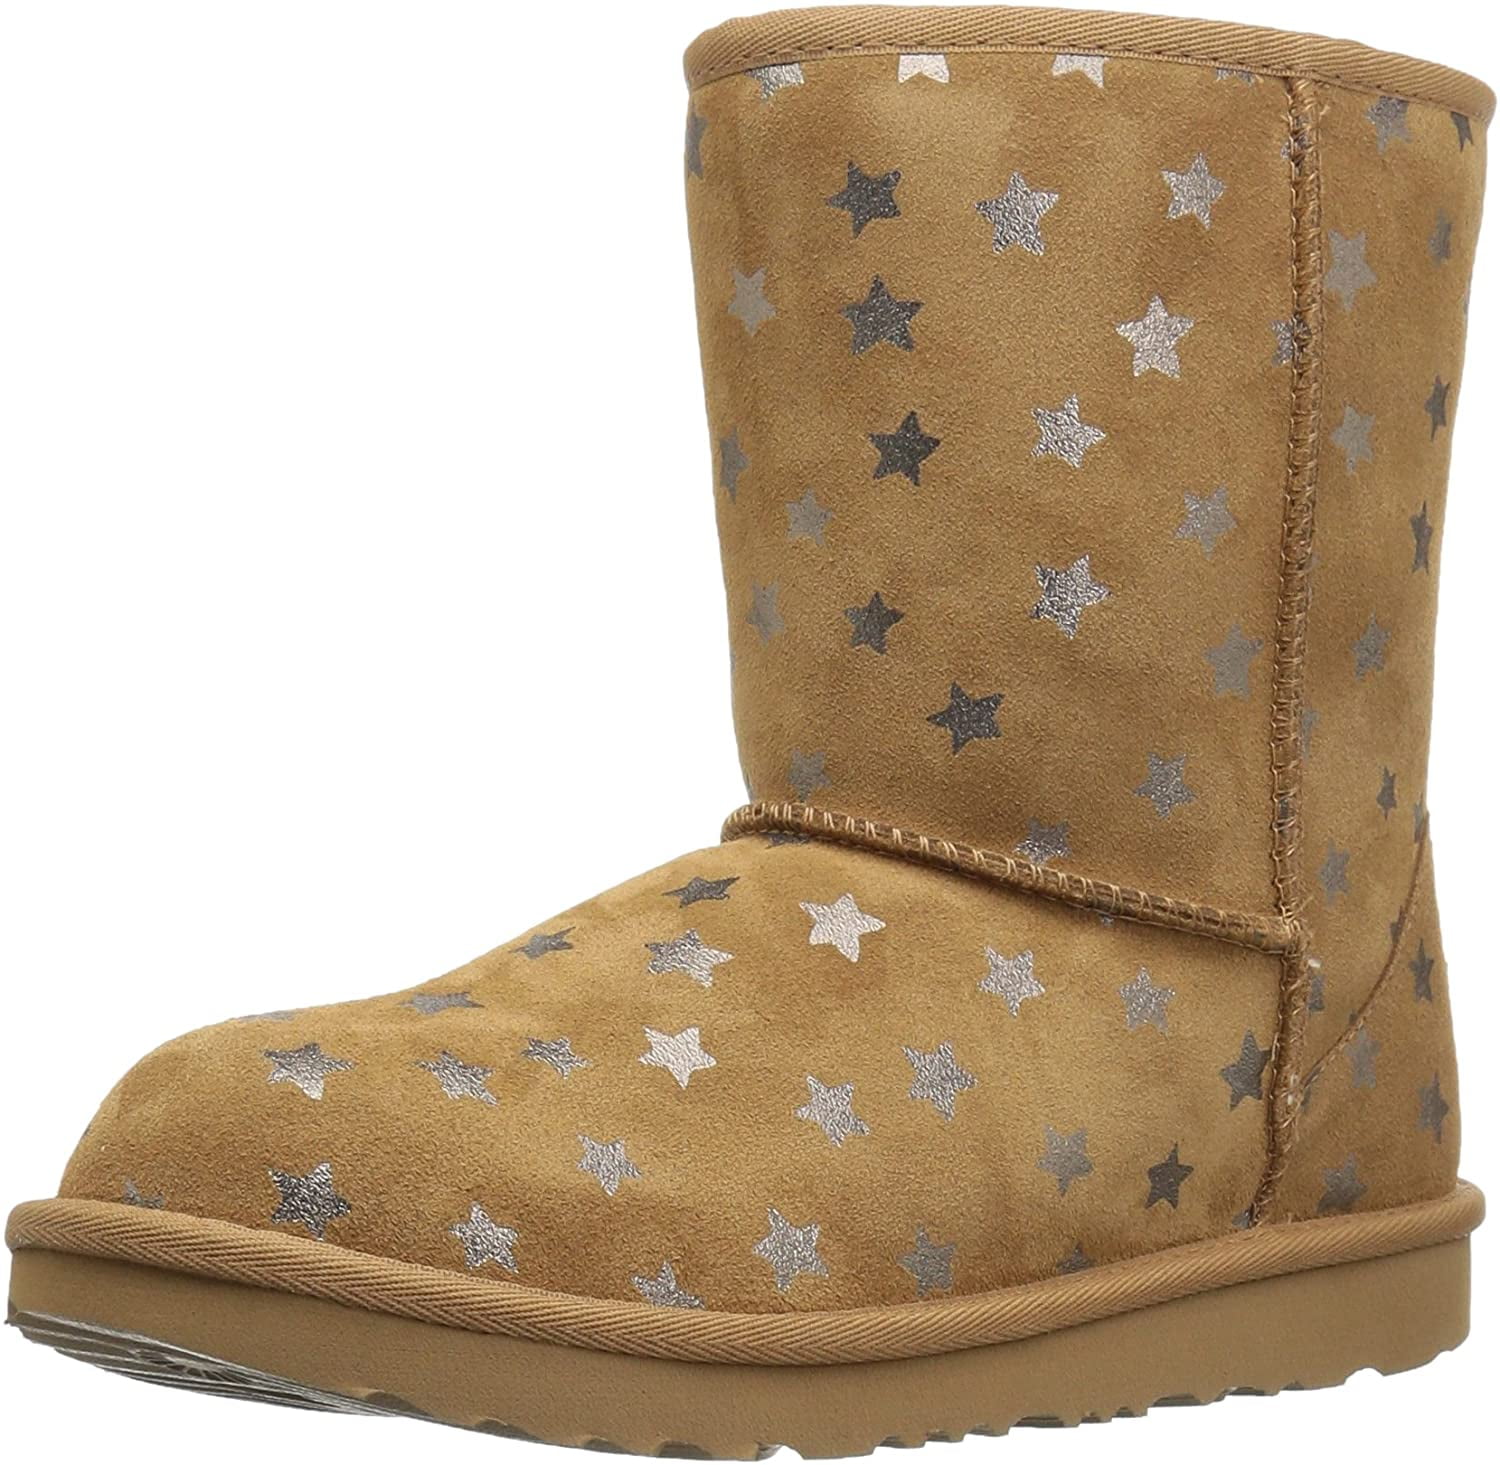 ugg boots with stars